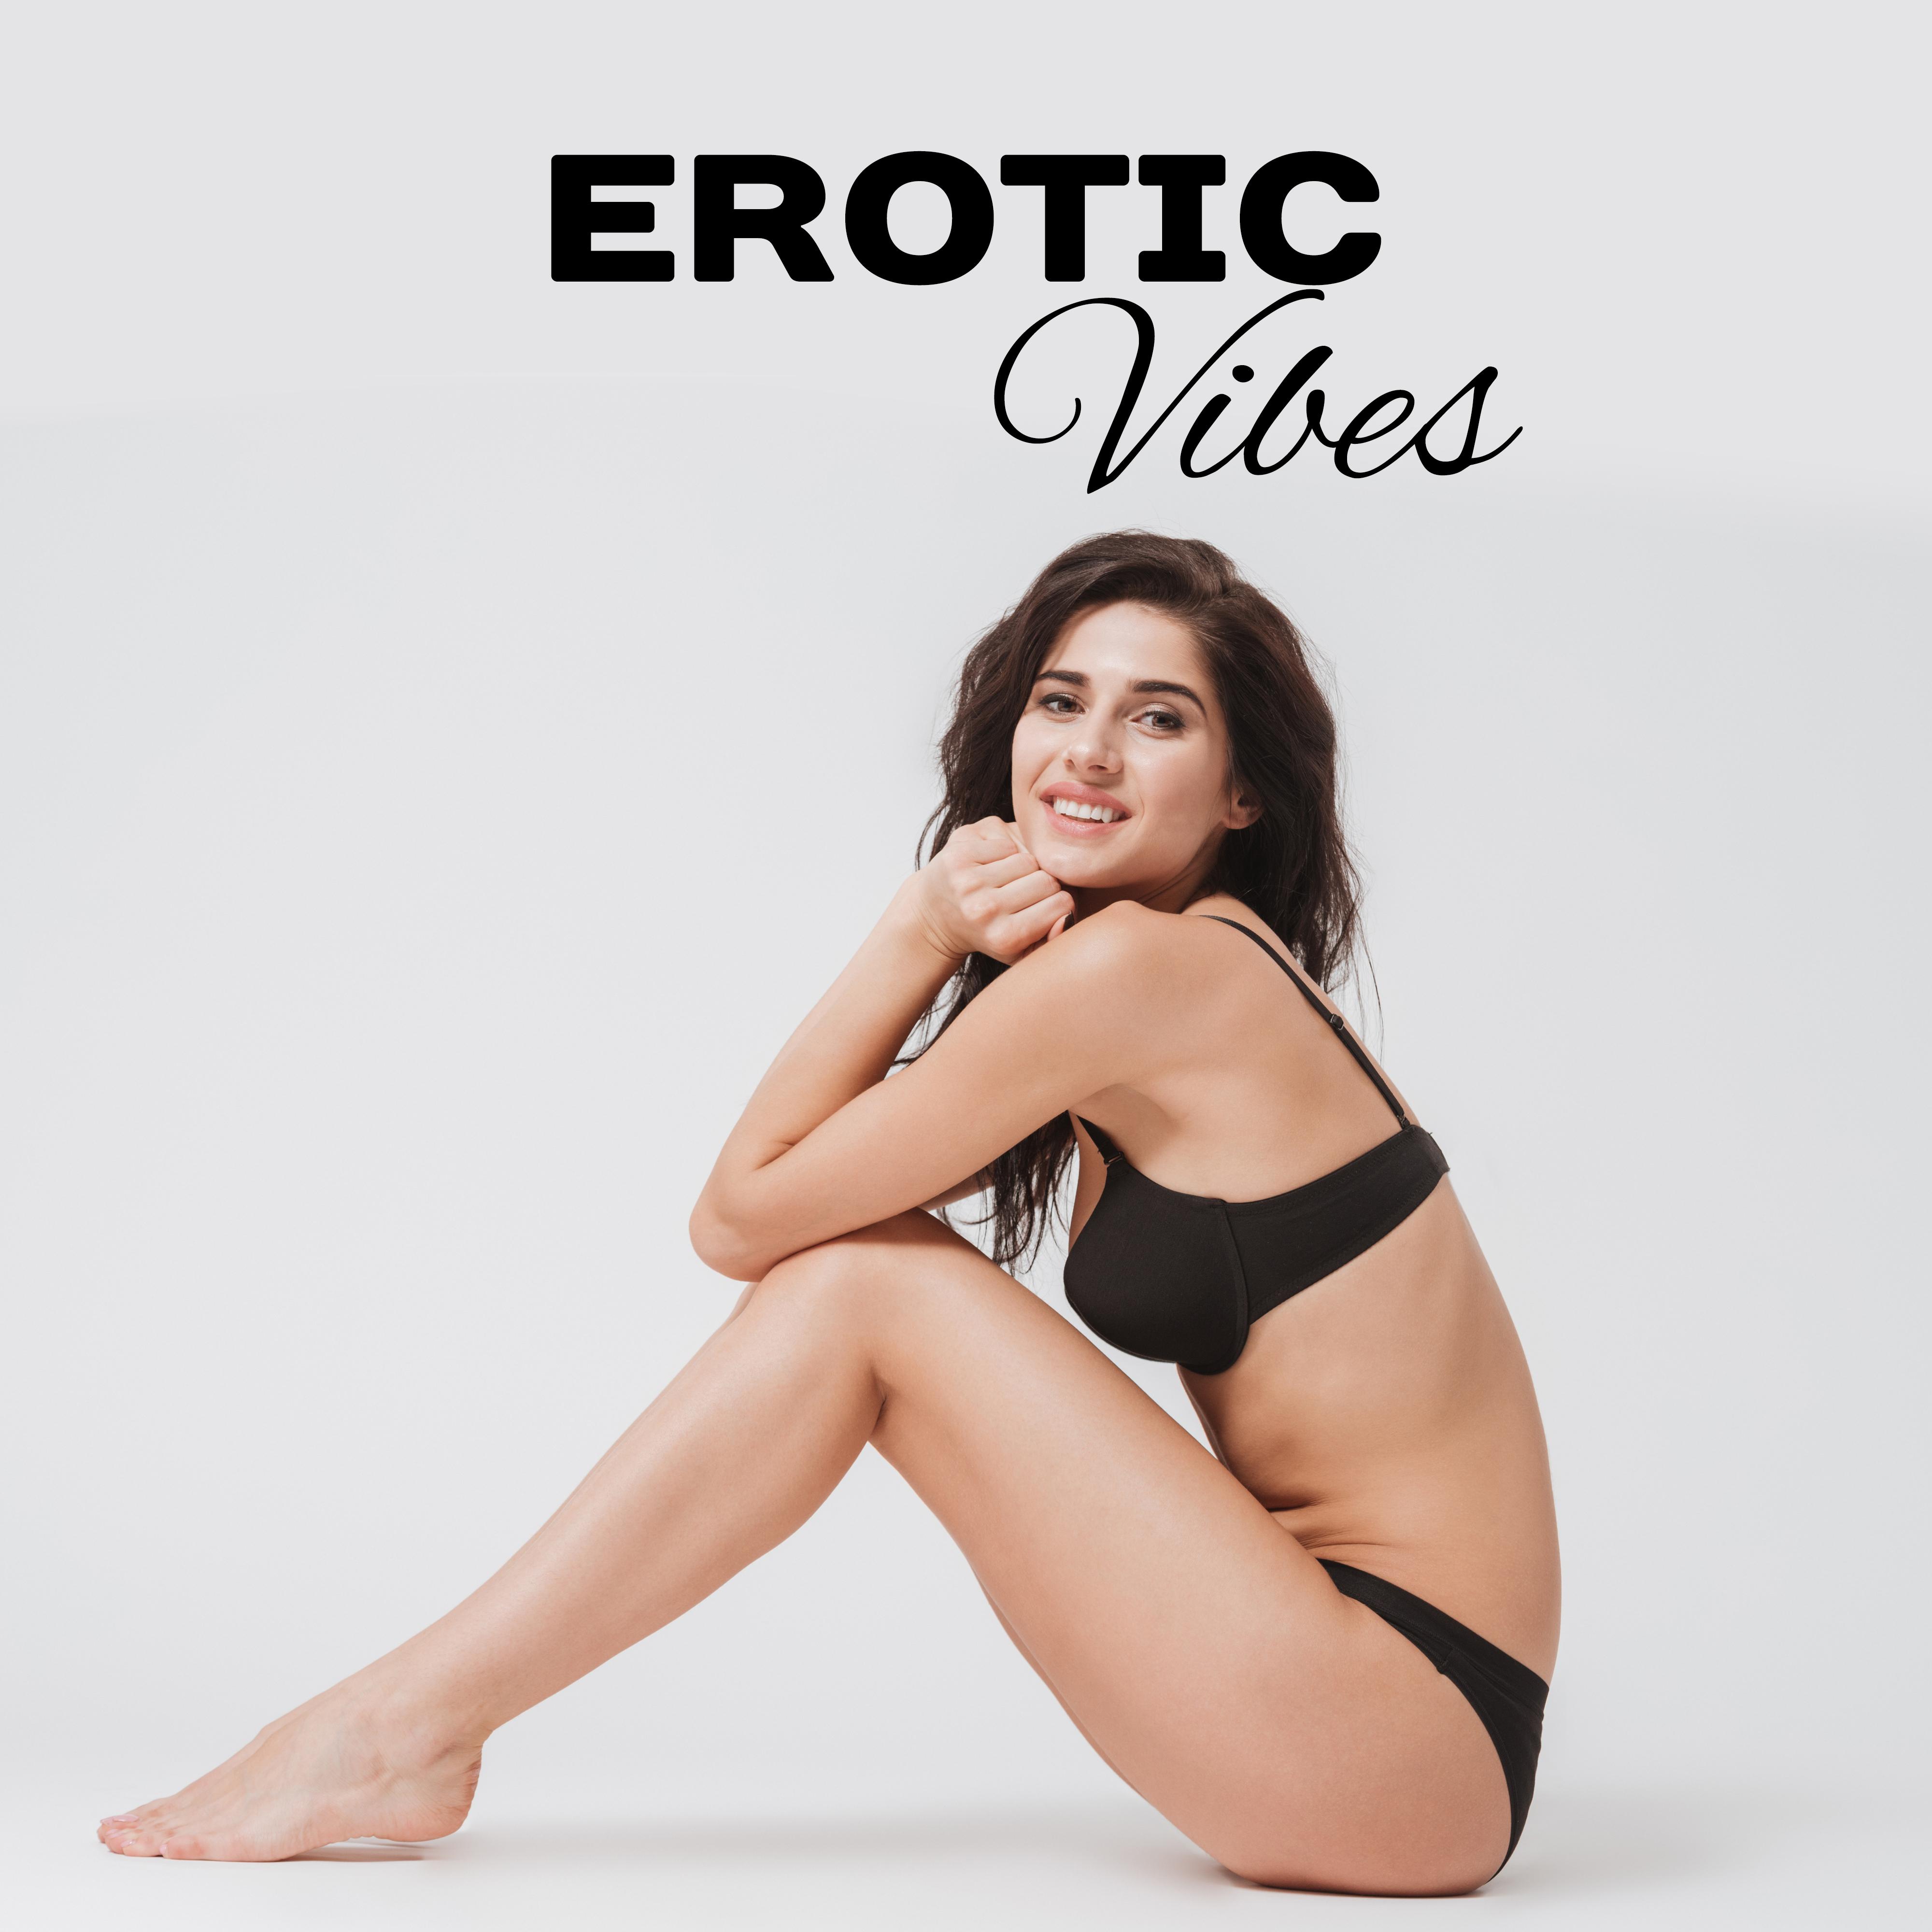 Erotic Vibes – Sensual Chill Out Music, Erotic Dance, Deep Massage, Relaxation for Two, Tantric ***, Rest